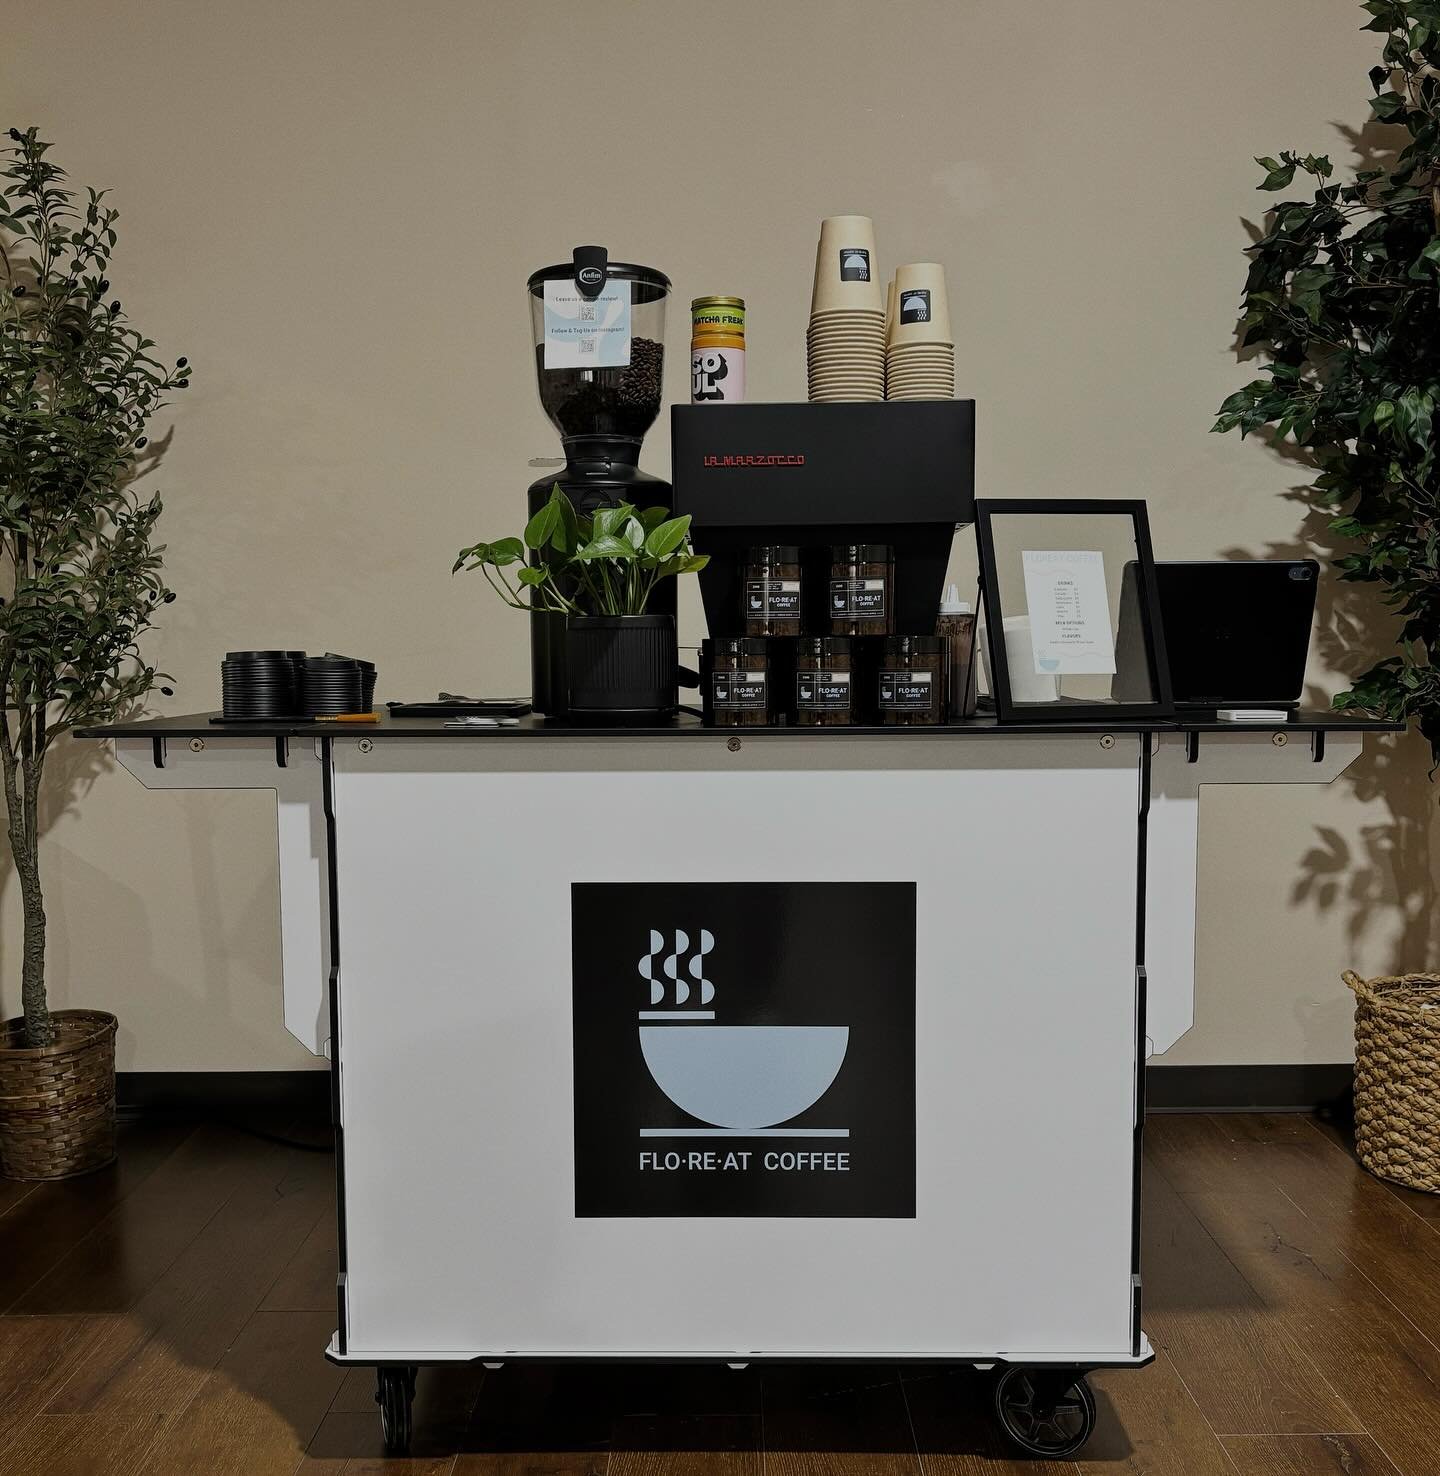 The Floreat Coffee cart. ❤️&zwj;🔥✨☺️

So simple, so clean and ready to be set up at your next event! 

We love what we&rsquo;re doing and what we&rsquo;re building! 

#coffeecatering #southernoregonevents #specialtycoffeecart #mobilecoffeebar